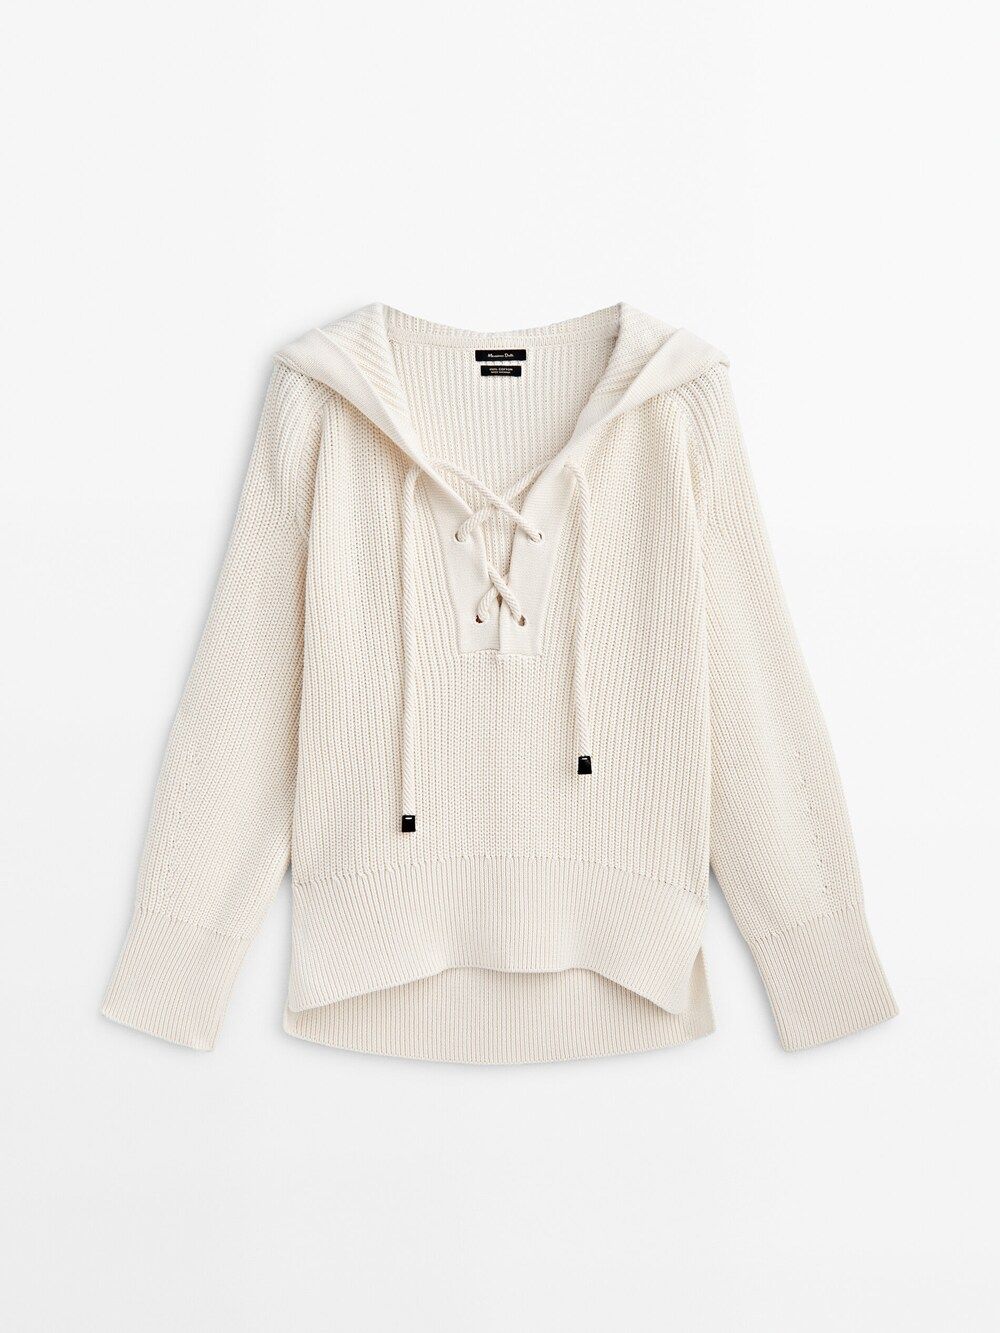 Purl knit sweater with hood and drawstrings | Massimo Dutti (US)